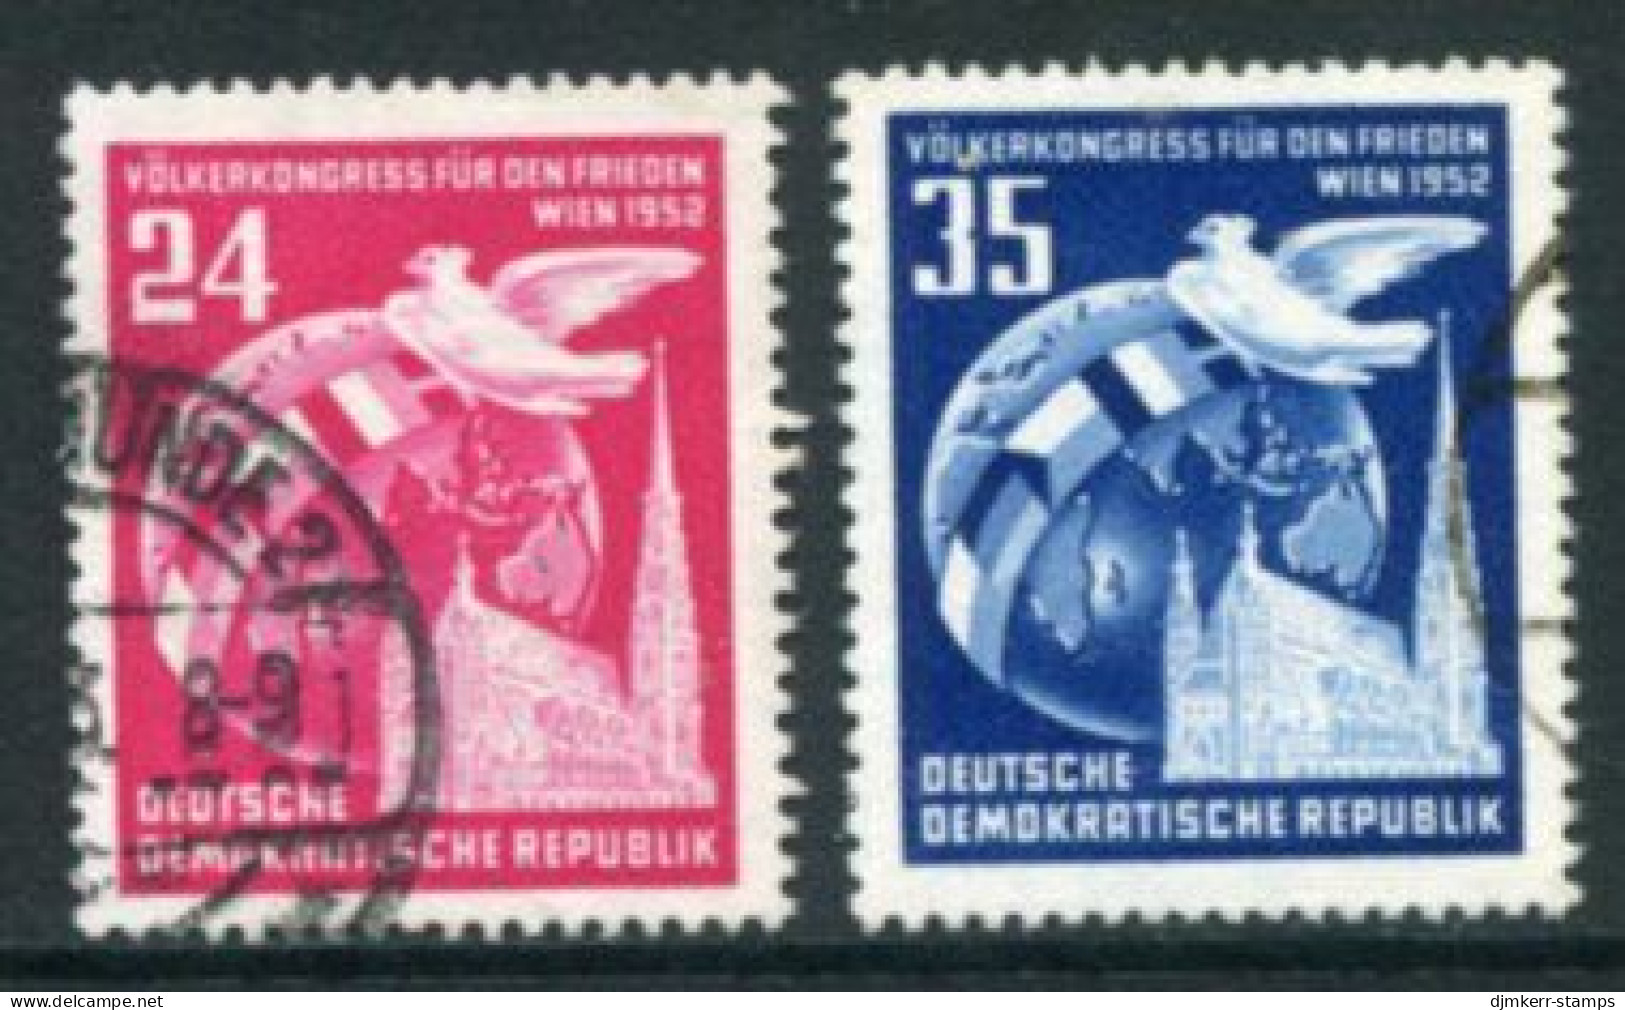 DDR / E. GERMANY 1952 People's Peace Congress Used..  Michel  320-21 - Gebraucht